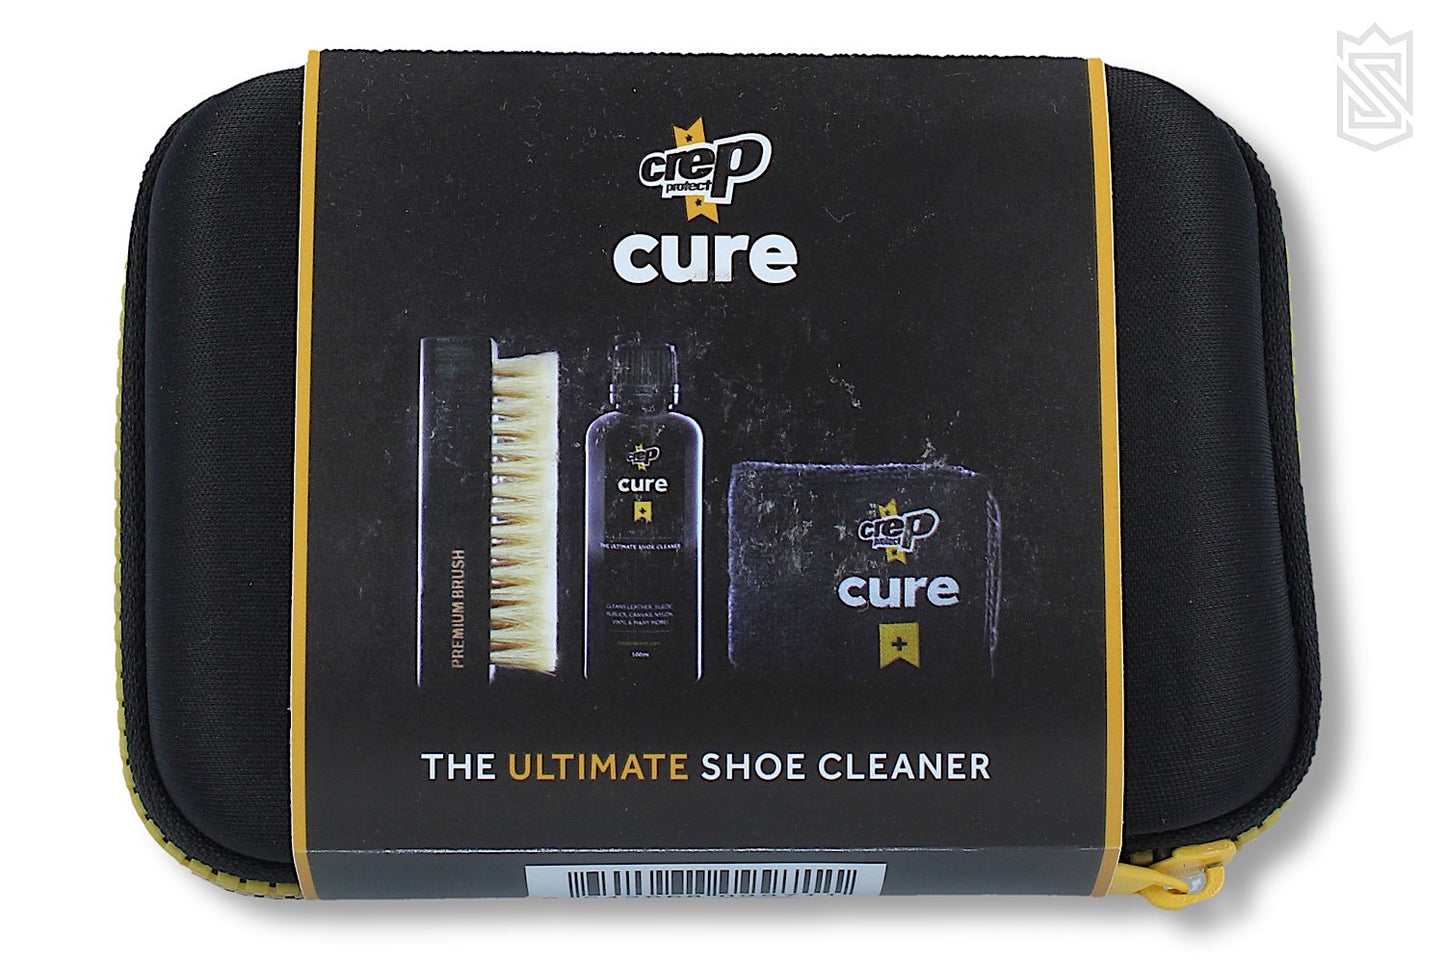 Cure Travel - The Ultimate Shoe Cleaner - Schrittmacher Shop